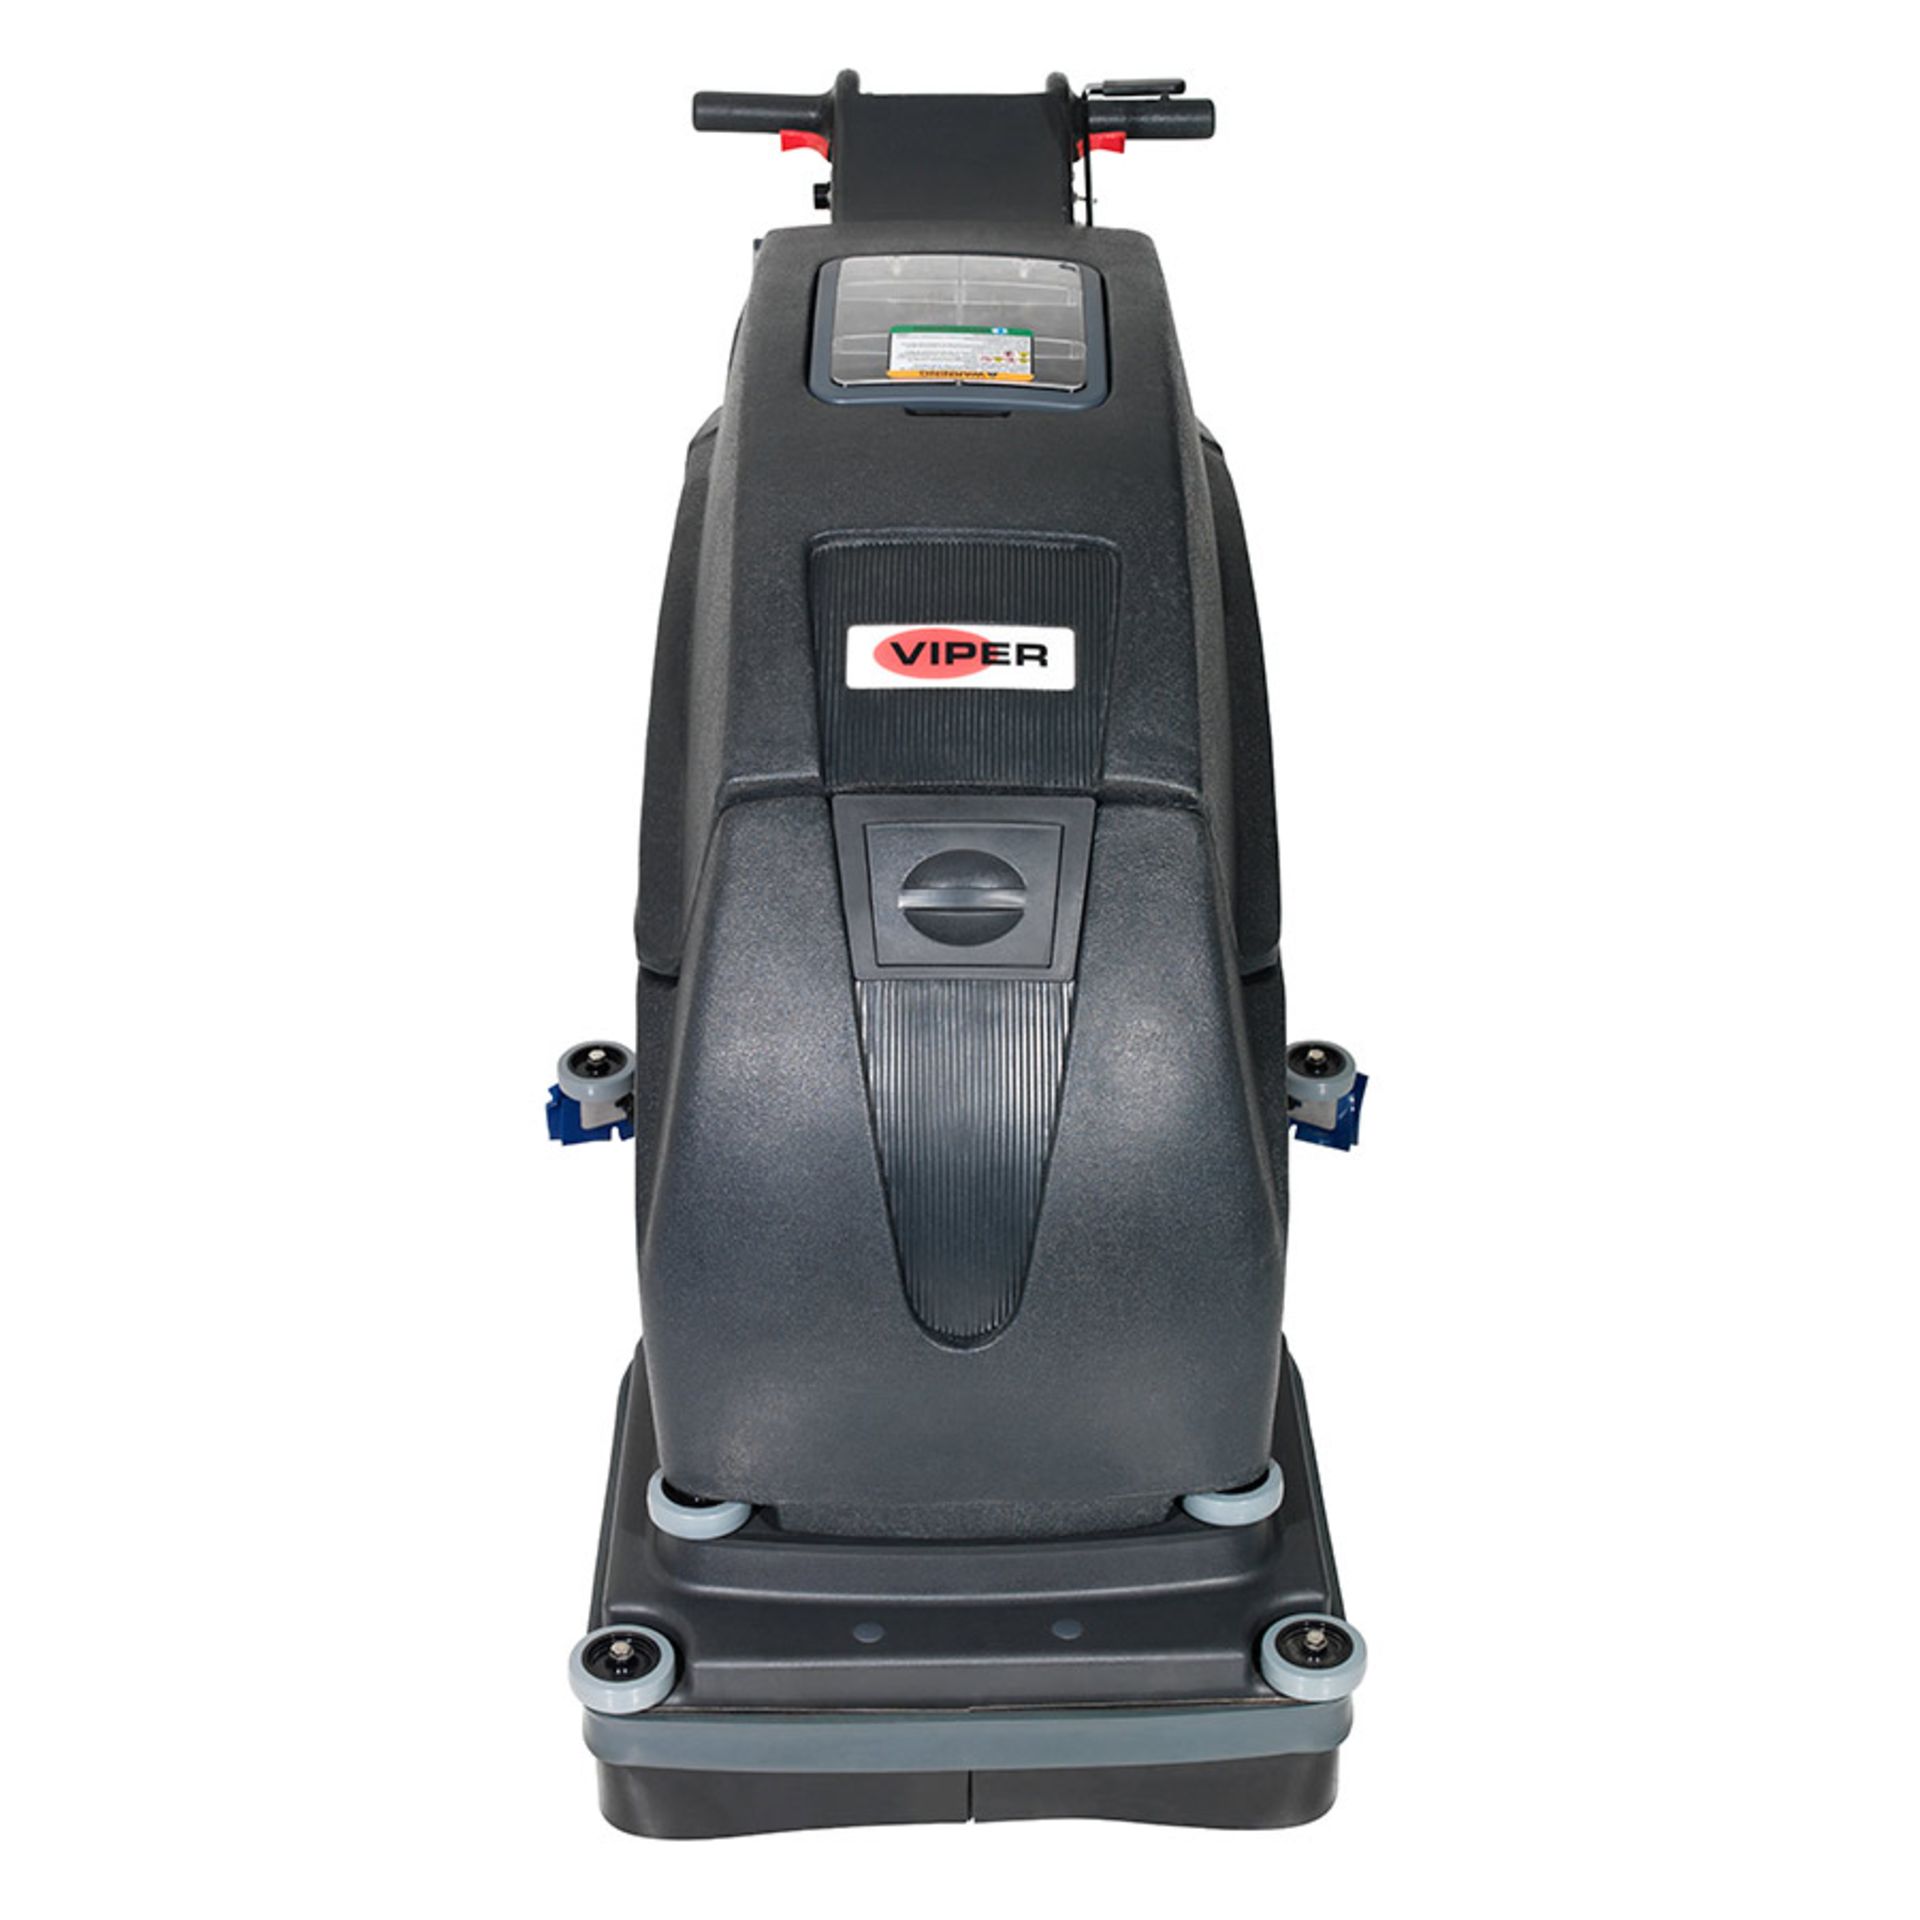 Viper Fang 20HD Walk-behind scrubber dryer. Transaxle drive system.  Light and easy to manoeuvre. - Bild 3 aus 4